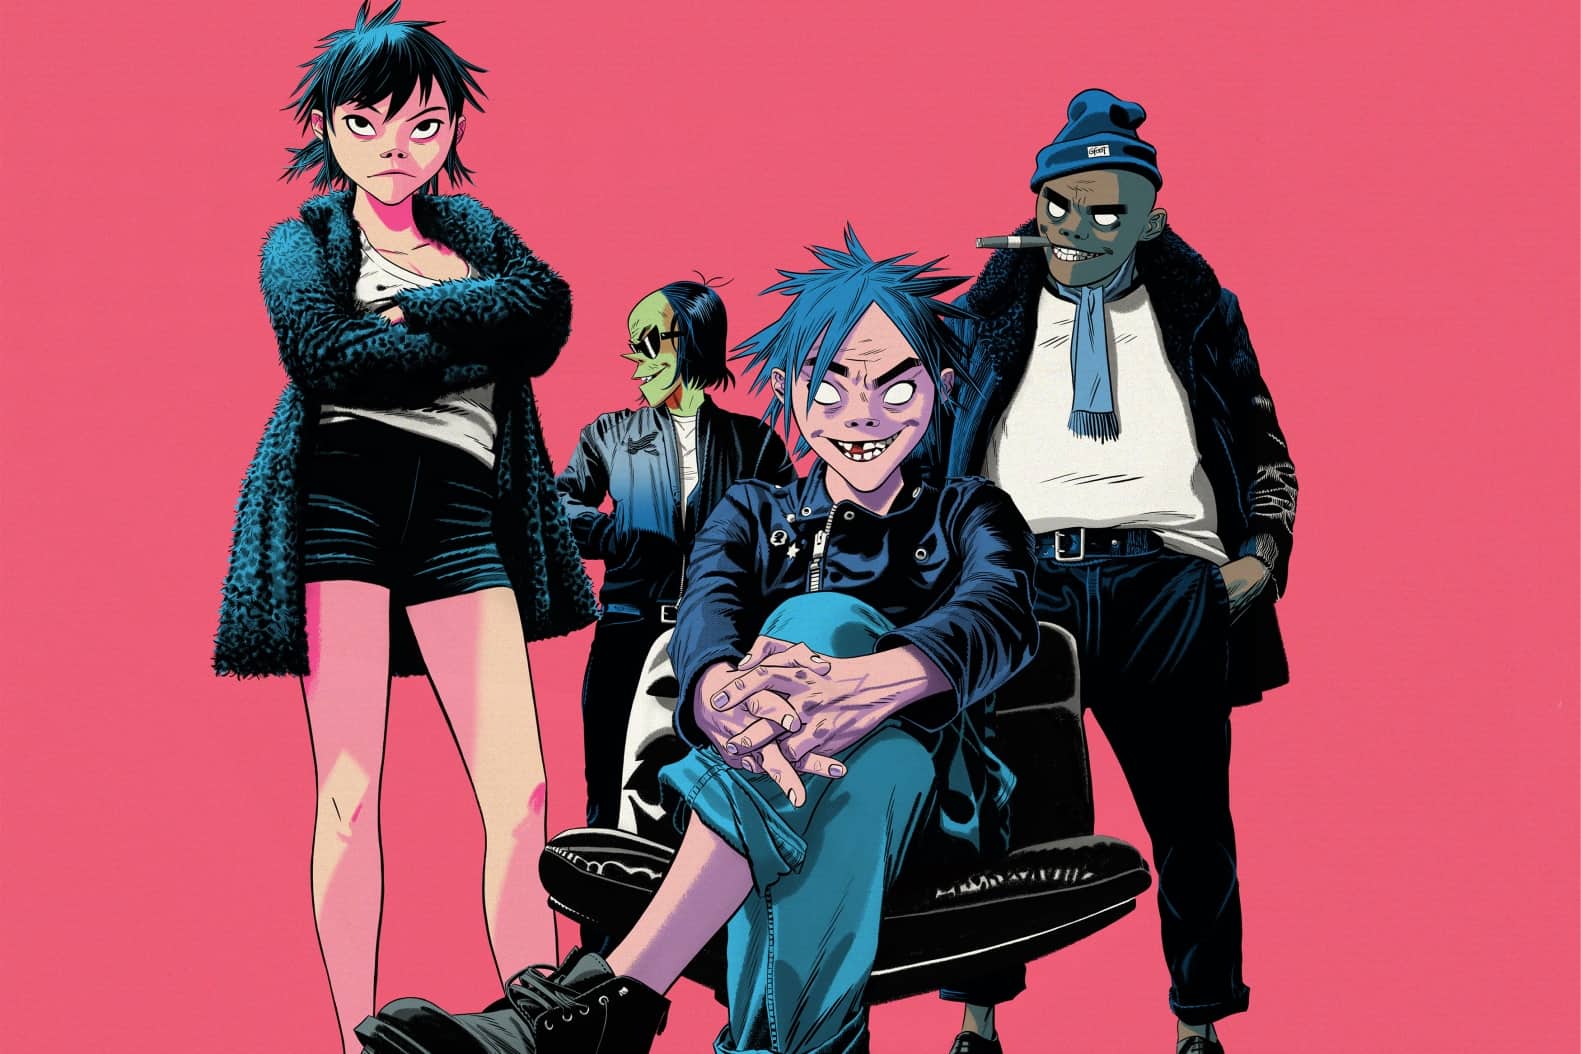 The members of the band, Gorillaz. 